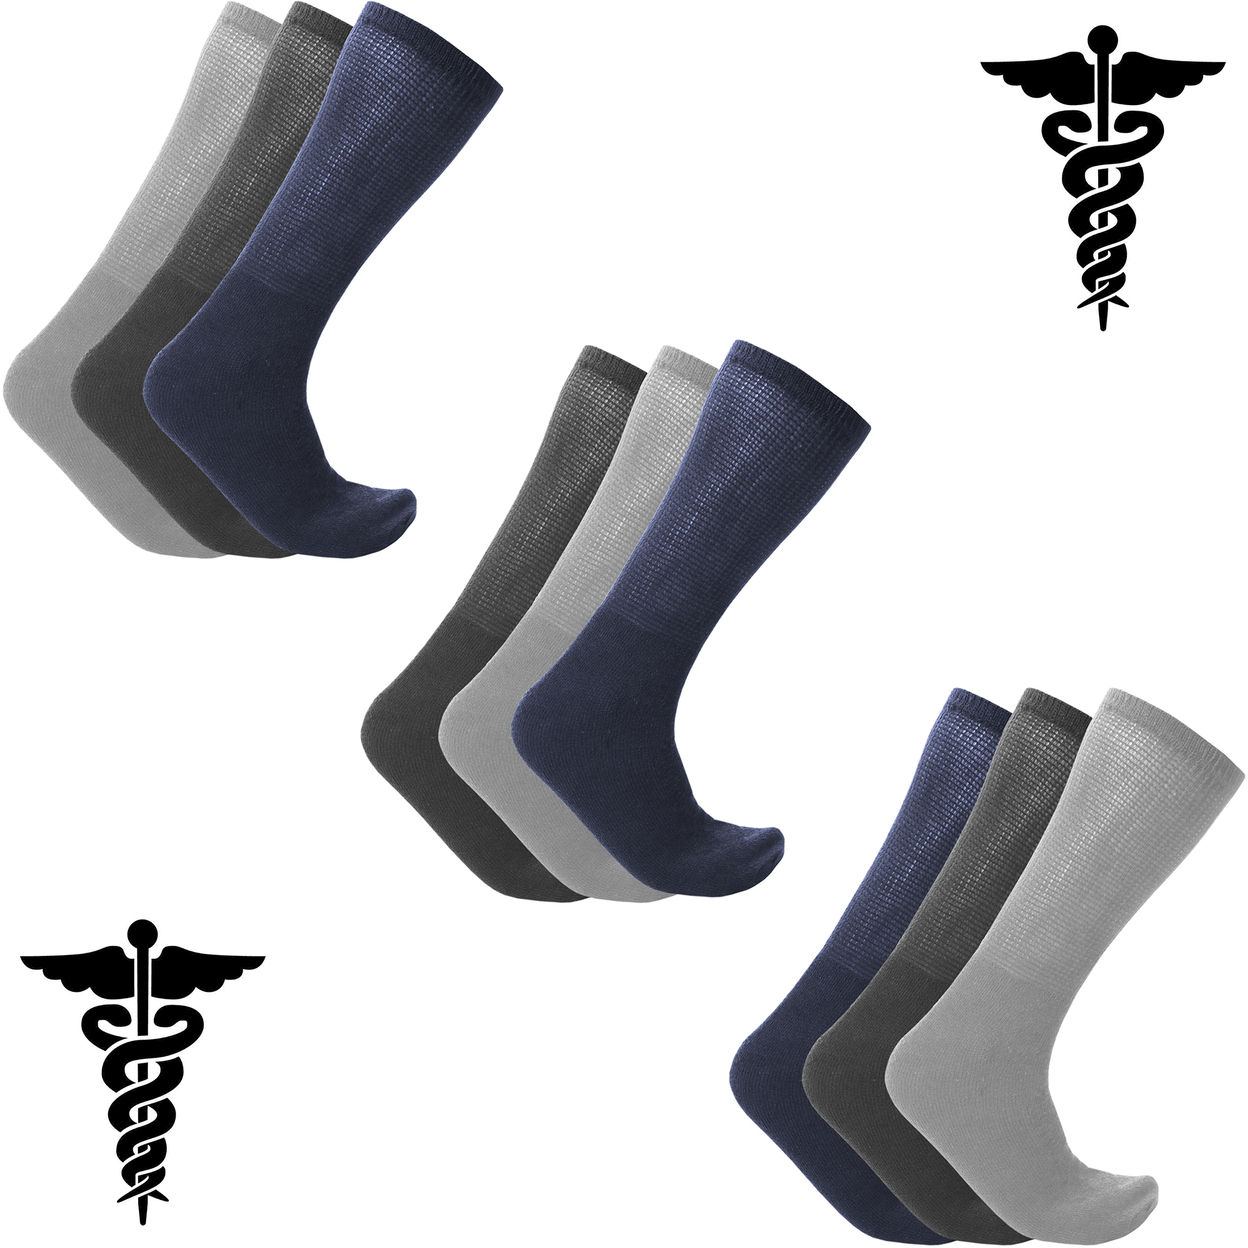 Multi-Pairs: Physician Approved Non-Binding Neuropathy Diabetic Crew Circulatory Socks - 3-pairs, Assorted